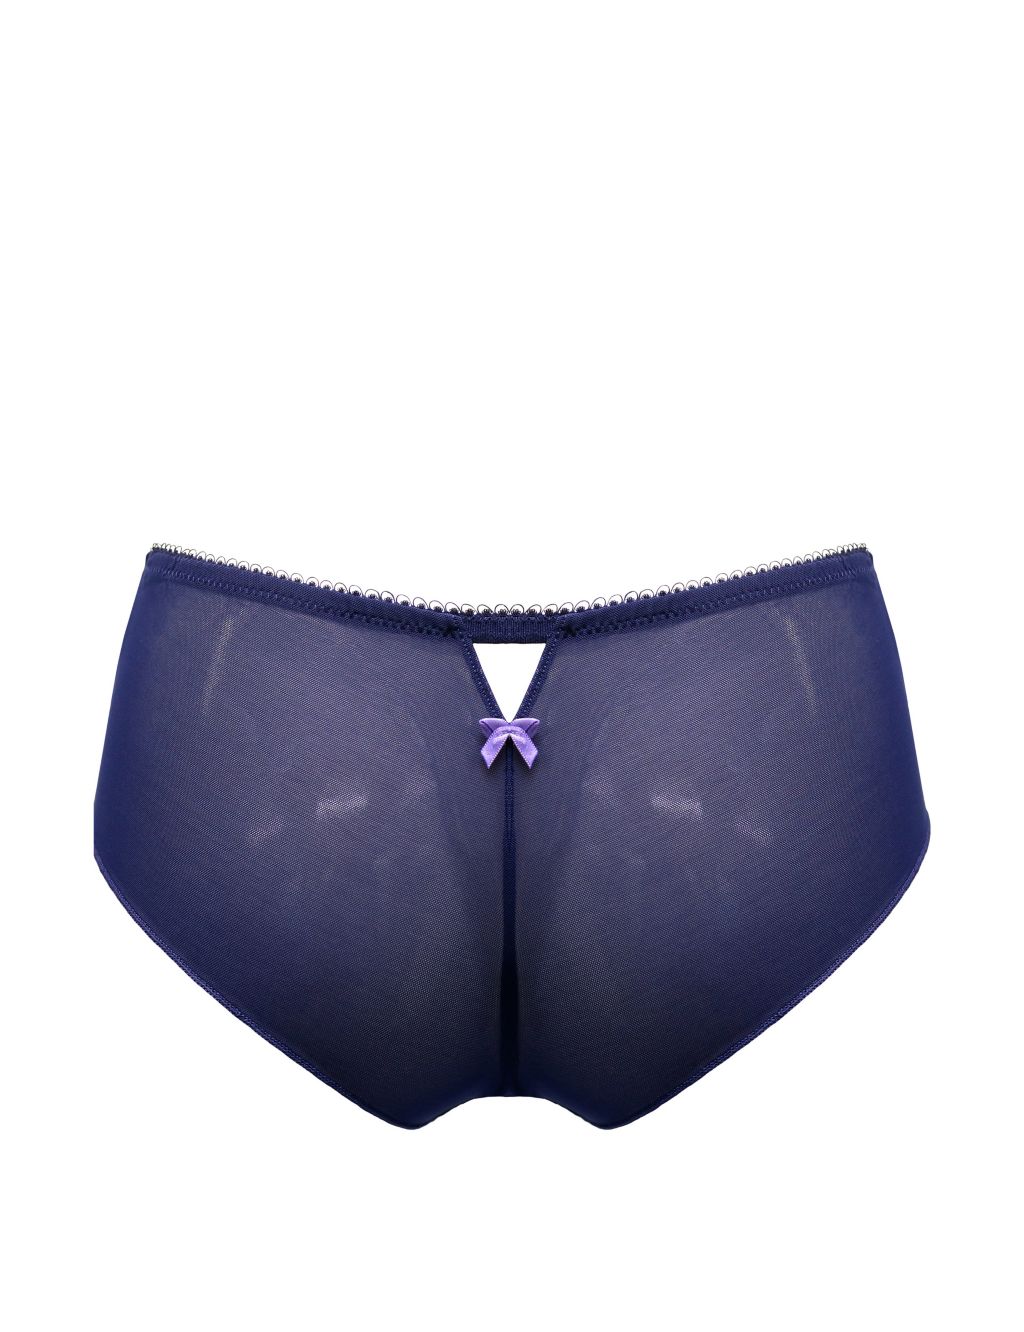 Amour French Knickers image 6